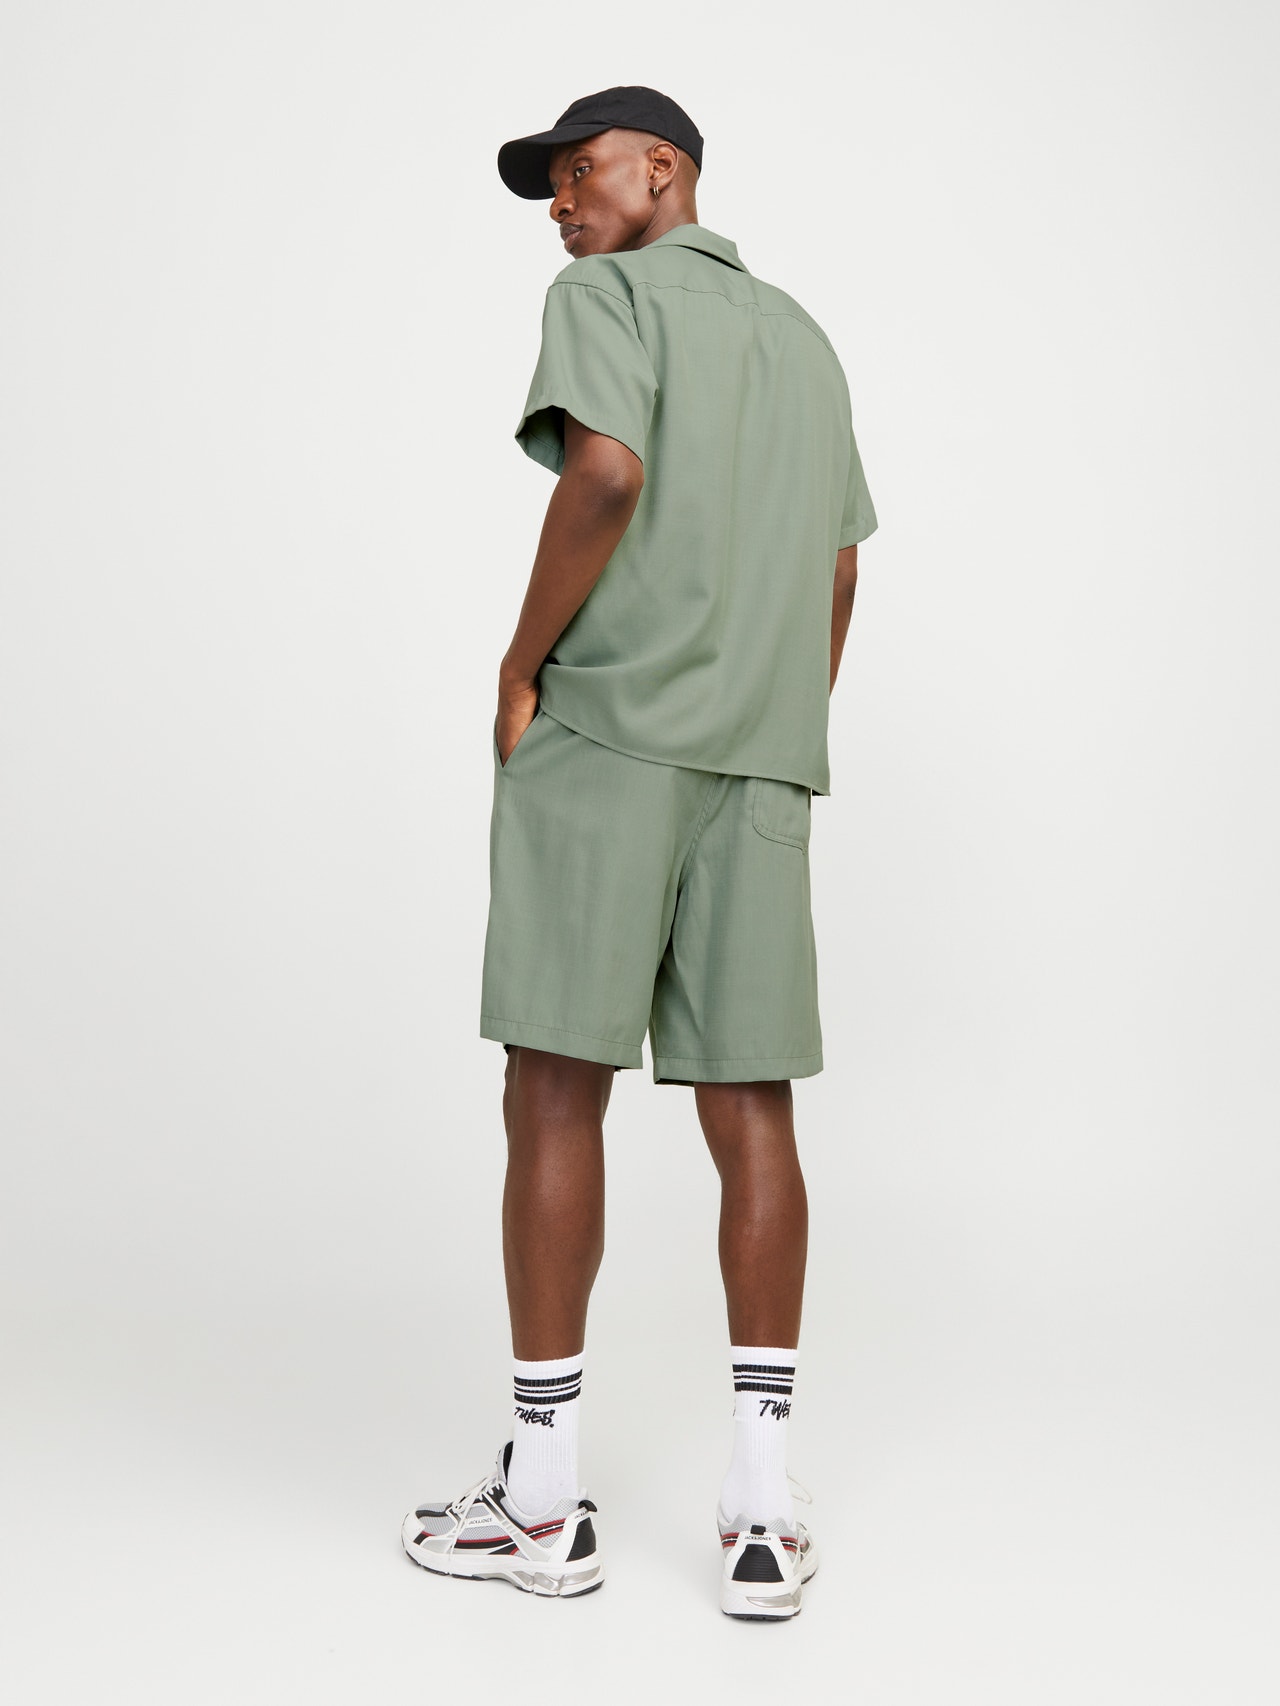 Jack & Jones Relaxed Fit Hemd -Lily Pad - 12251027